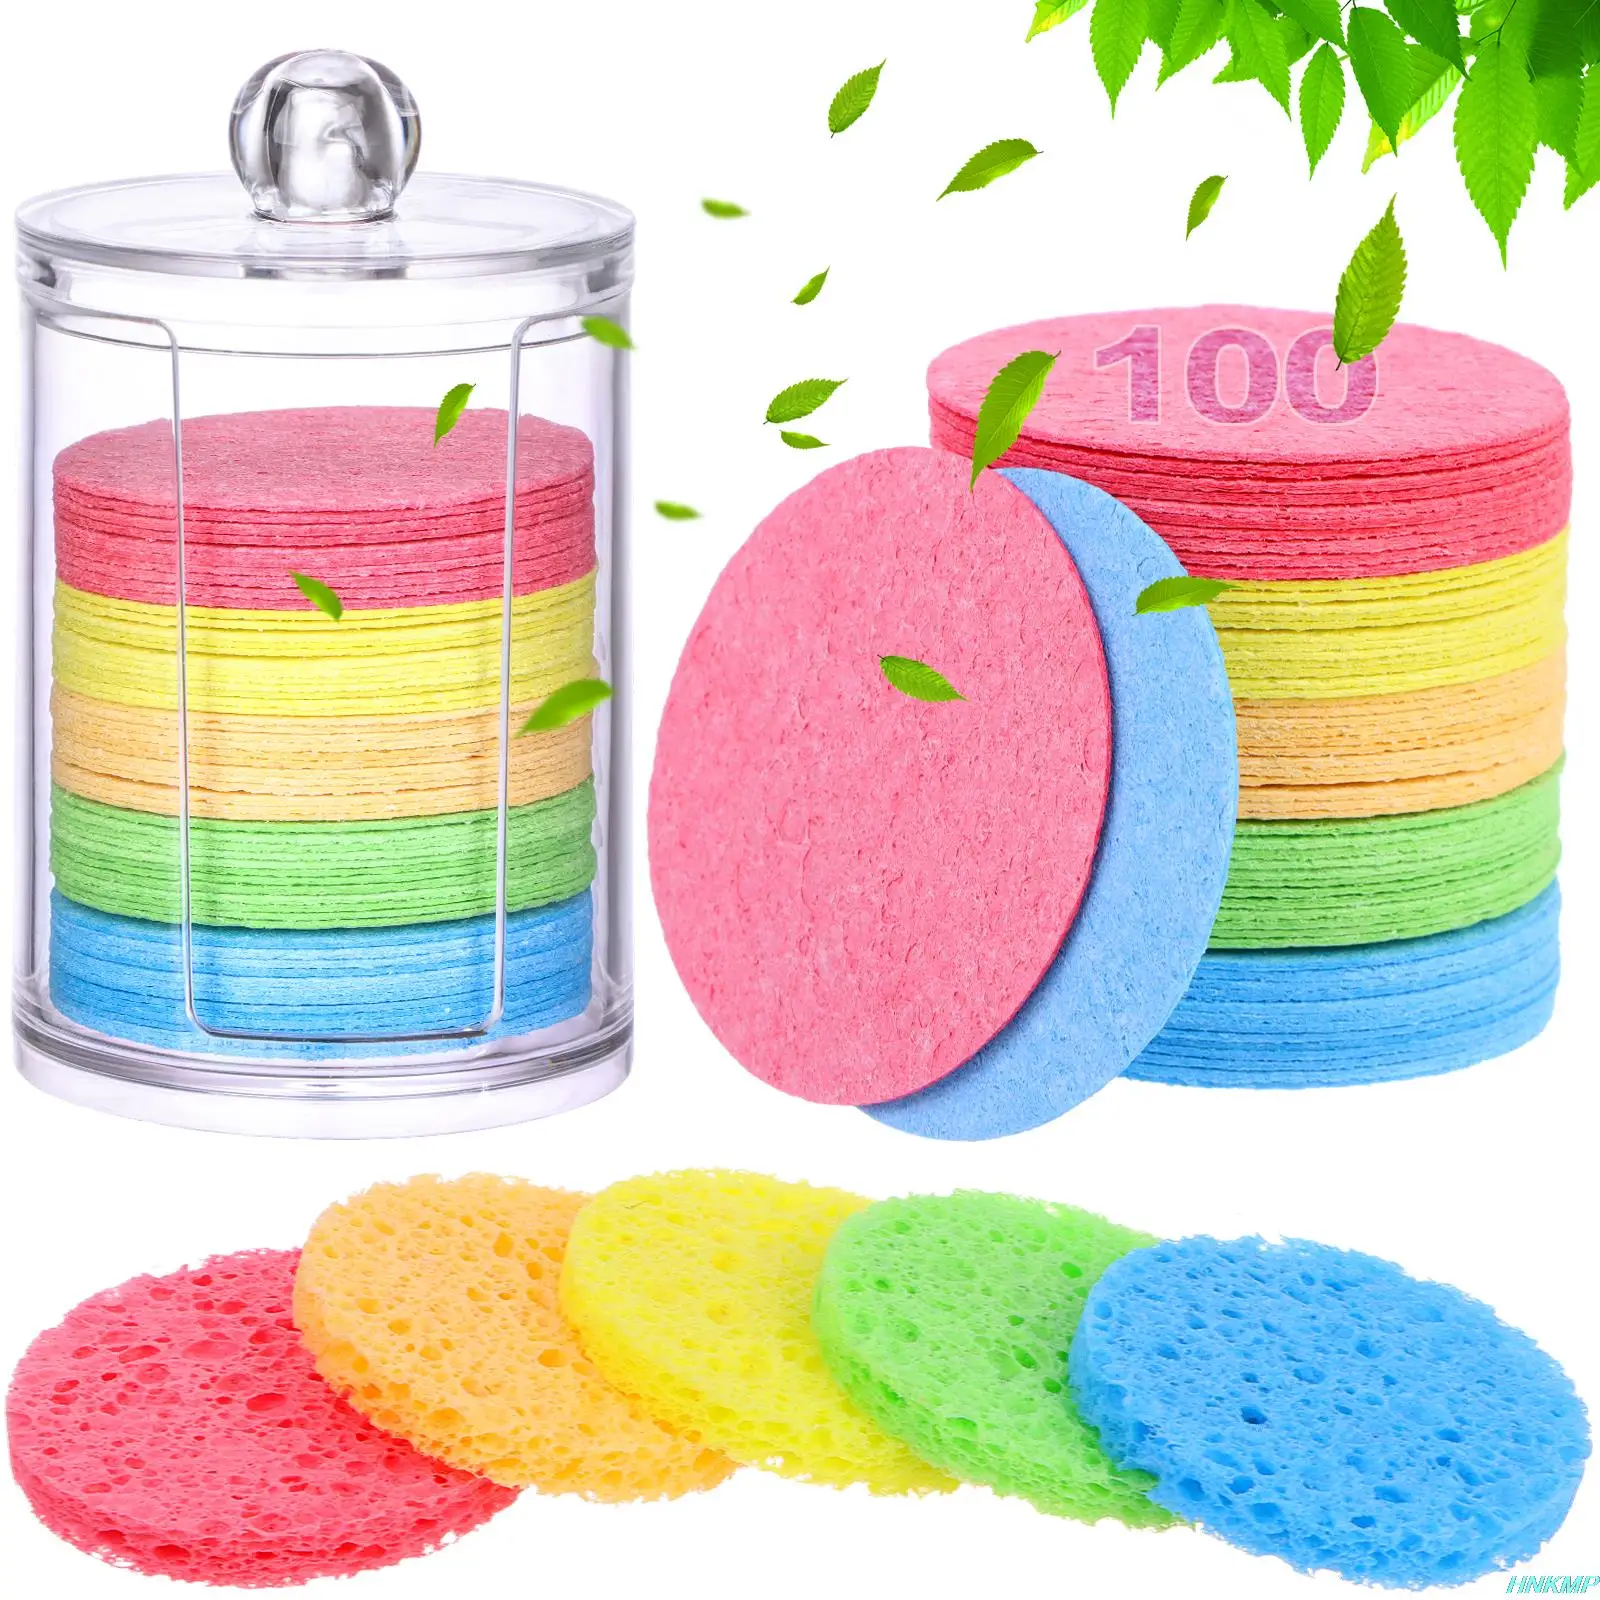 

100 Pcs Compressed Facial Sponges with Plastic Storage Container for daily face wash, deep pore cleansing, exfoliating